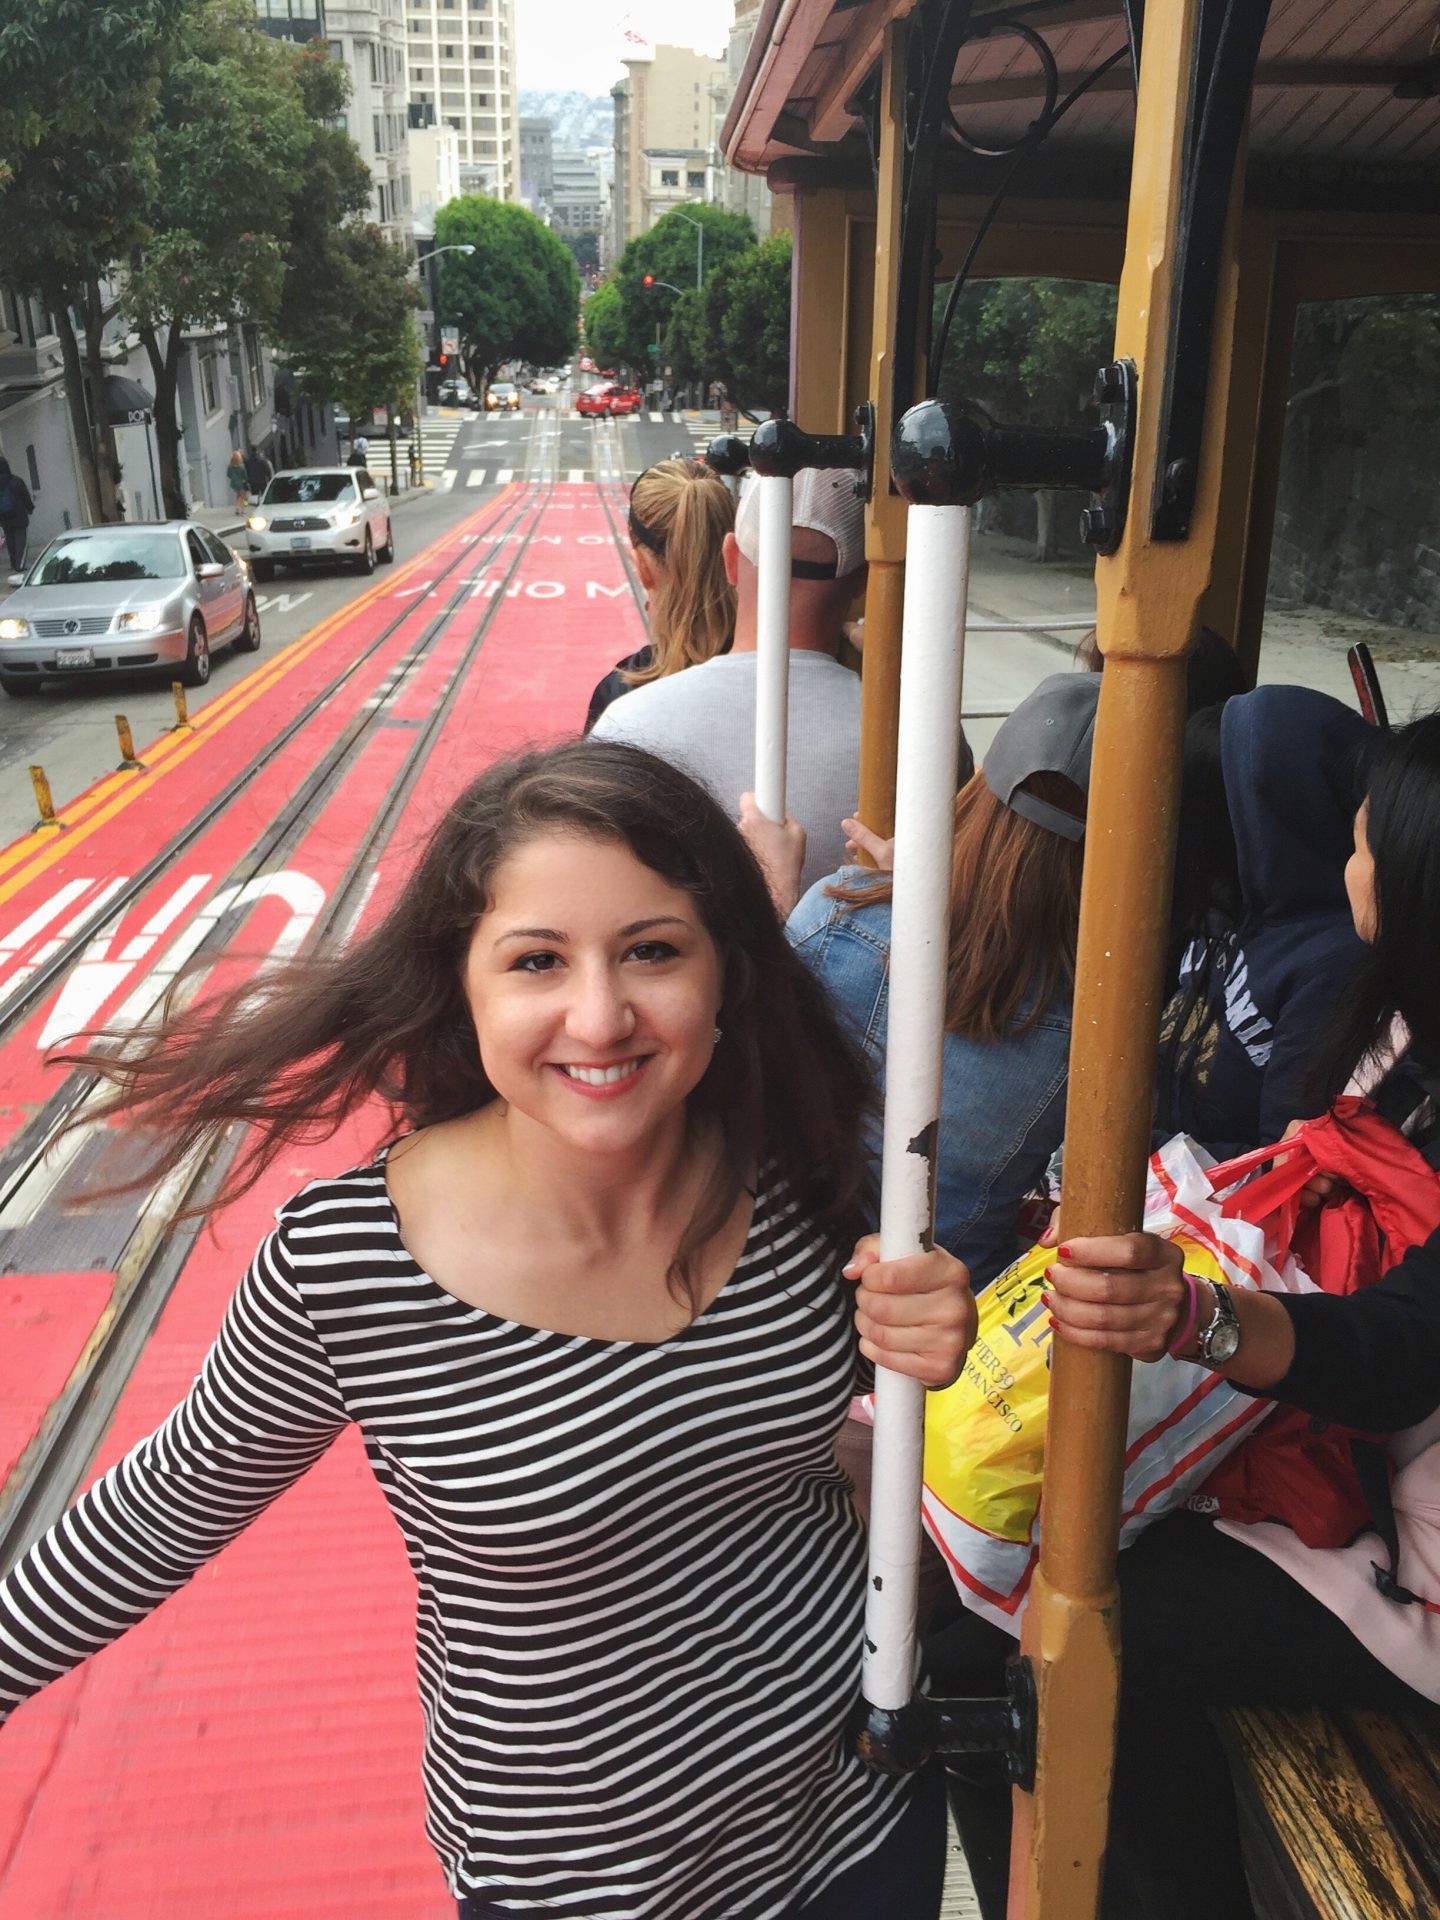 How to ride the cable cars in San Francisco